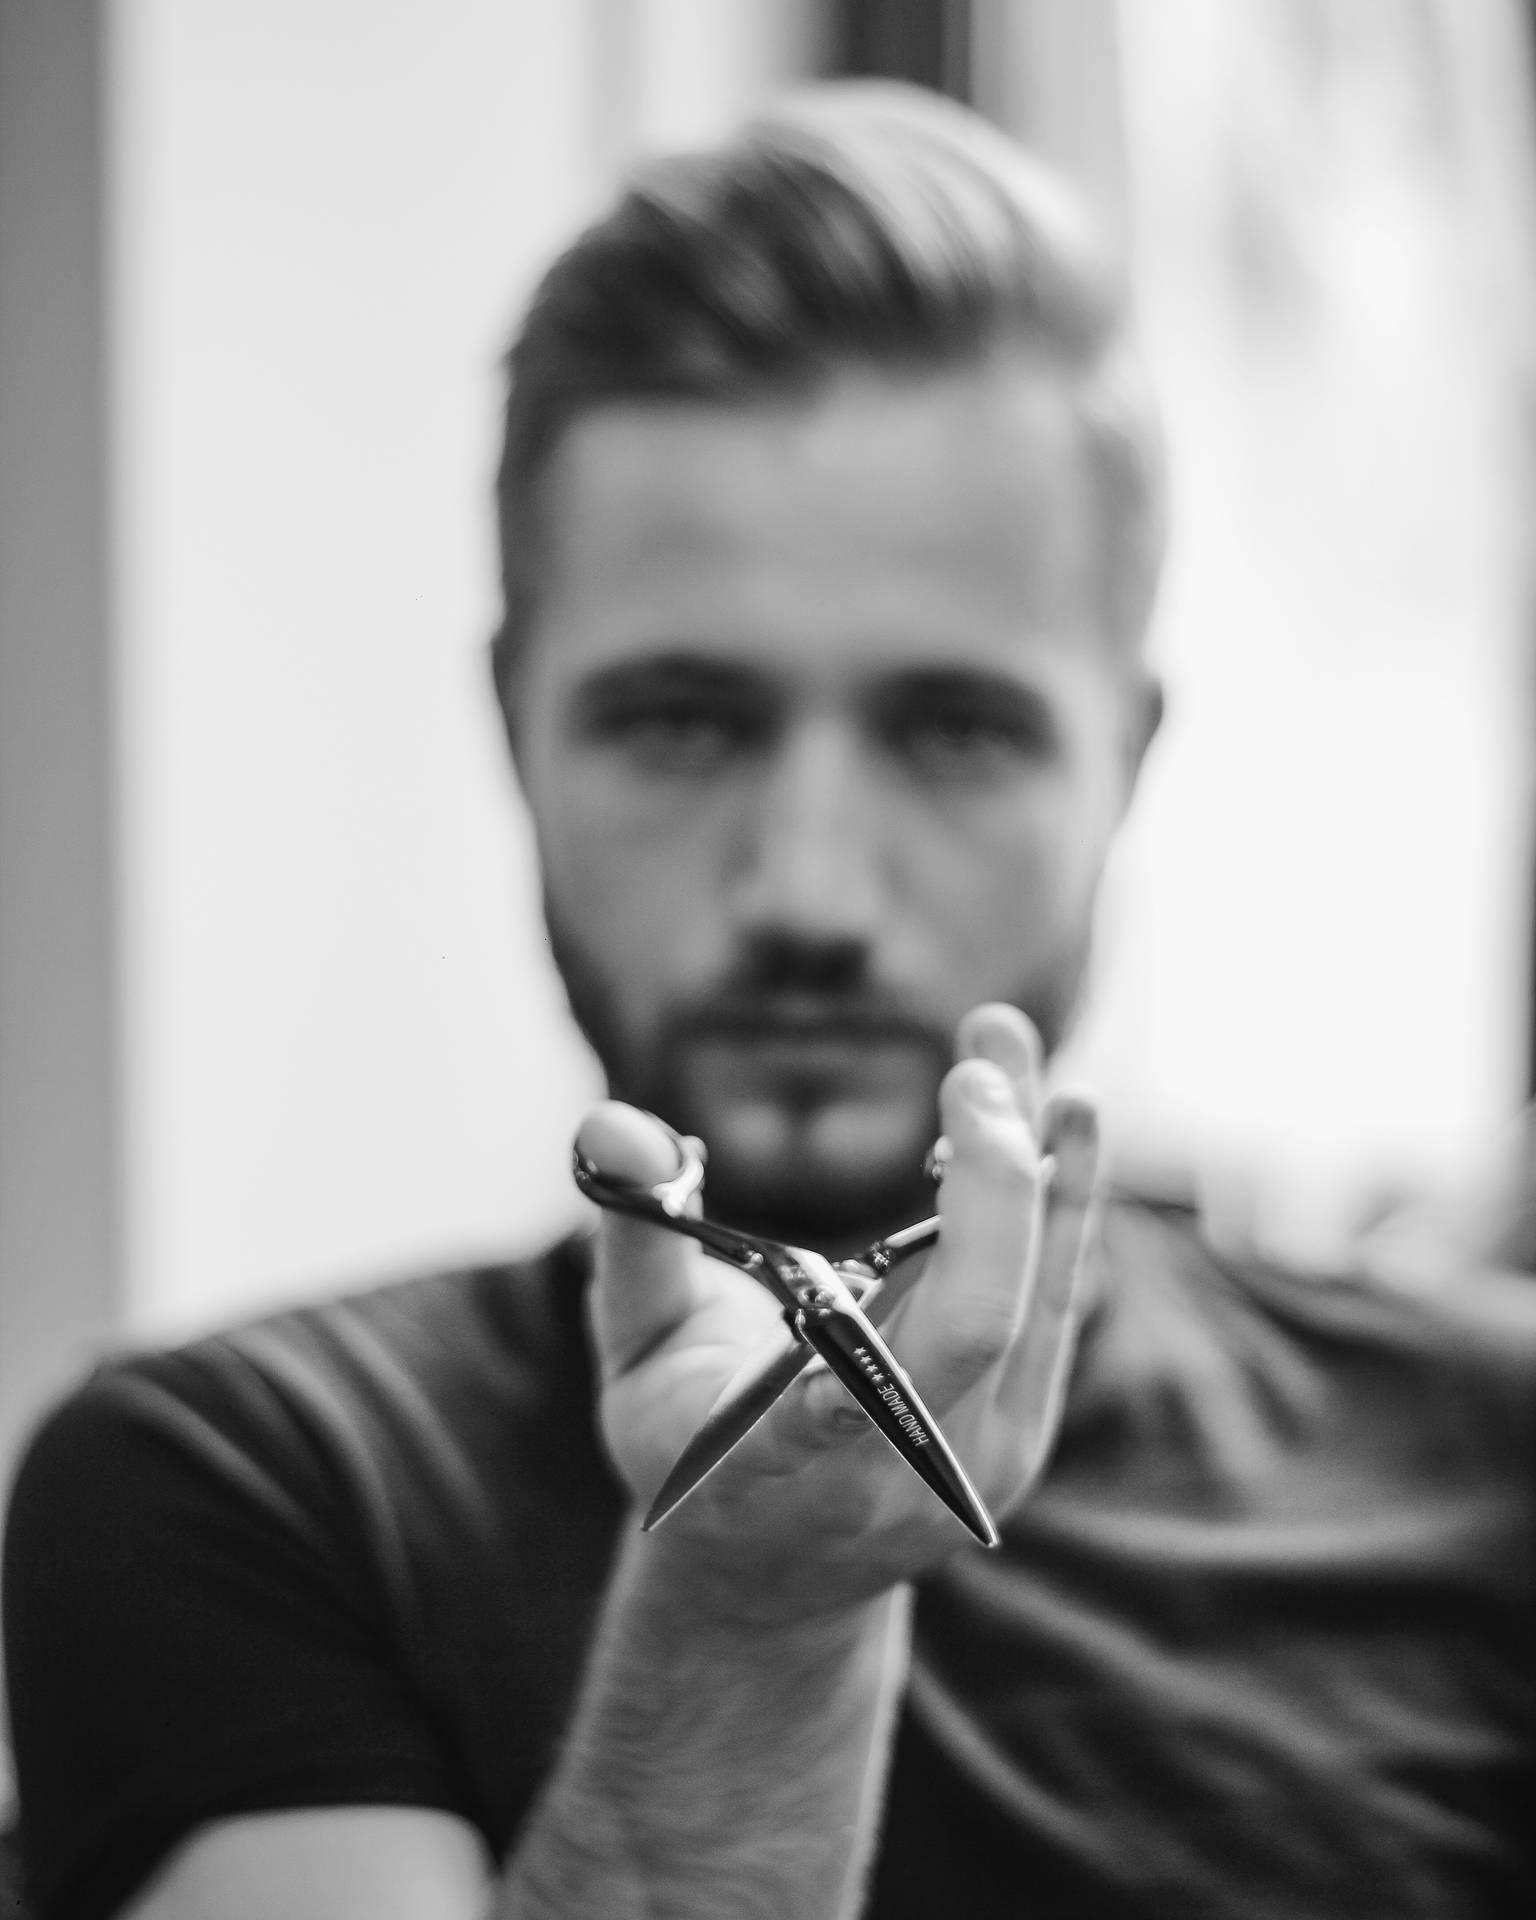 Conceptual Haircut Image In Grayscale